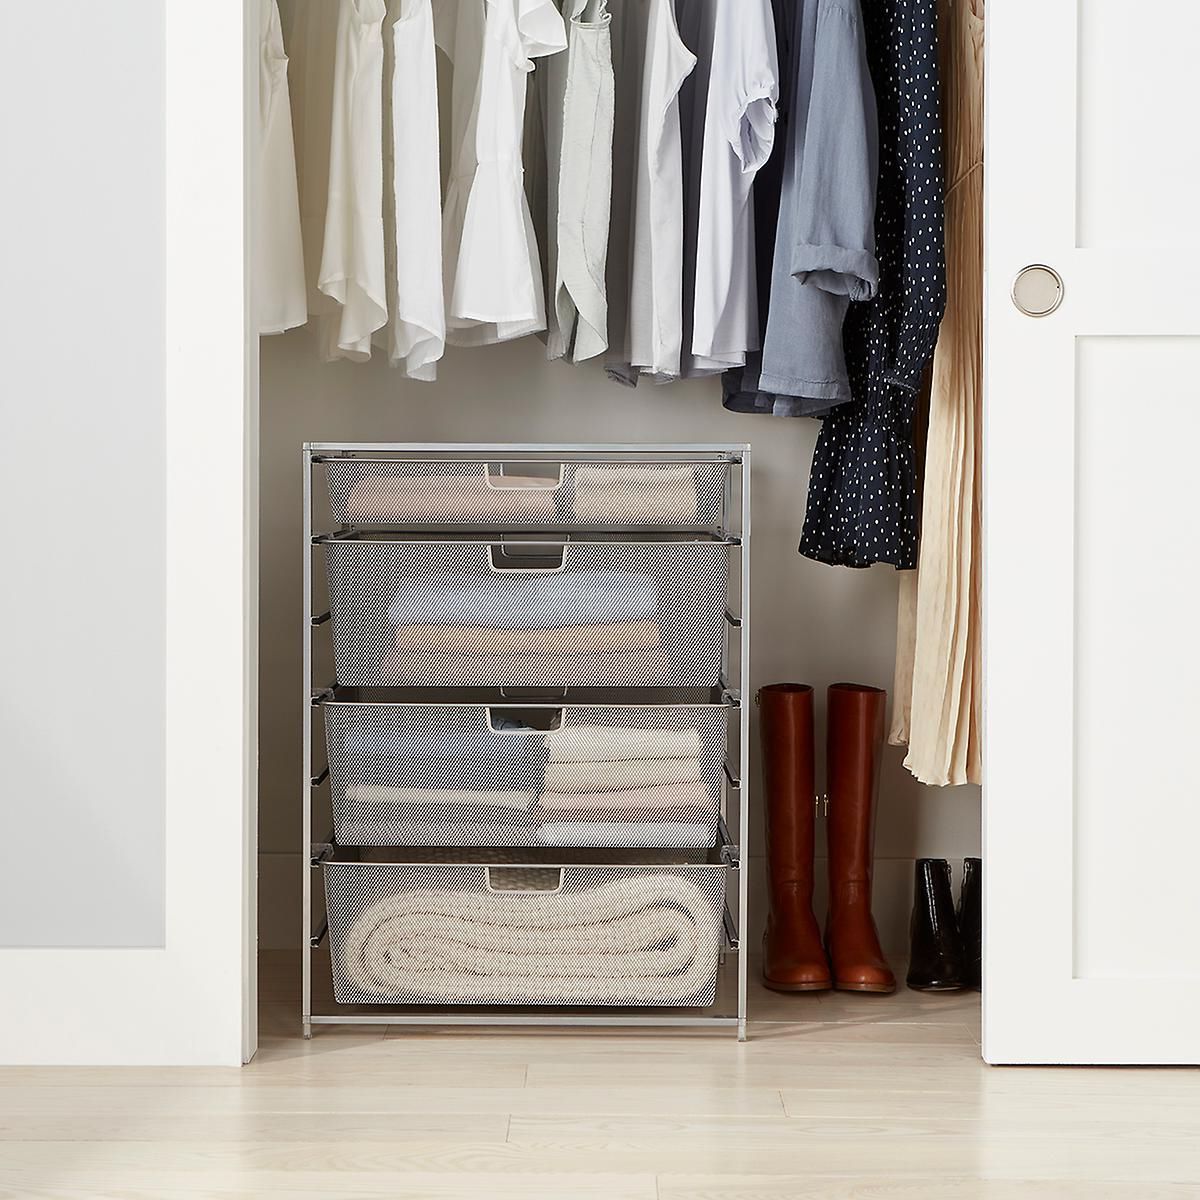 35 Best Closet Organization Ideas To Maximize Space Throughout Clothes Organizer Wardrobes (Gallery 1 of 20)